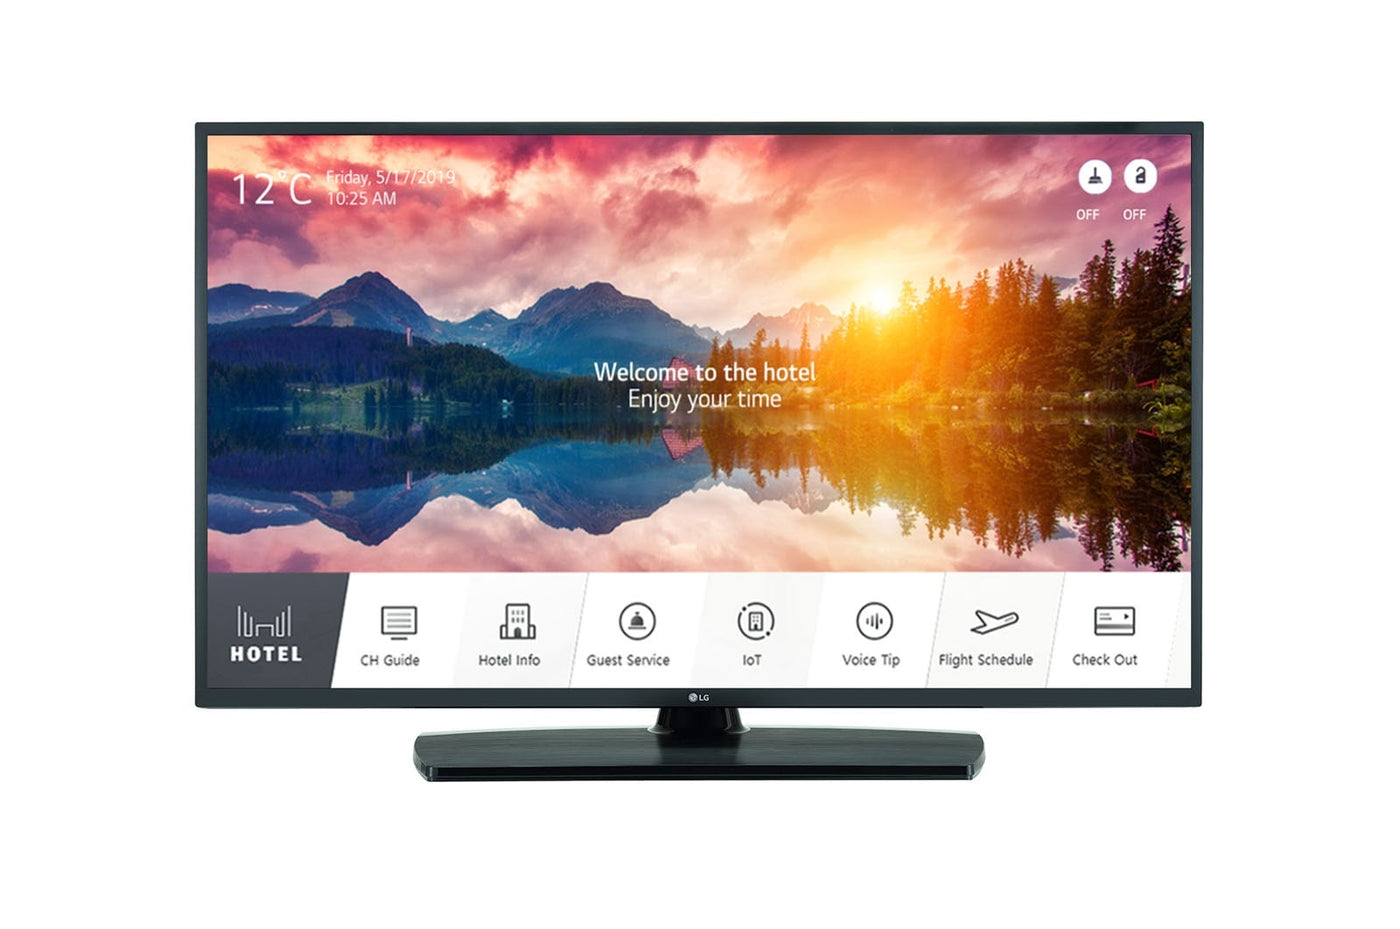 LG 43US660H9 43" Pro:Centric Smart Hospitality TV Front View